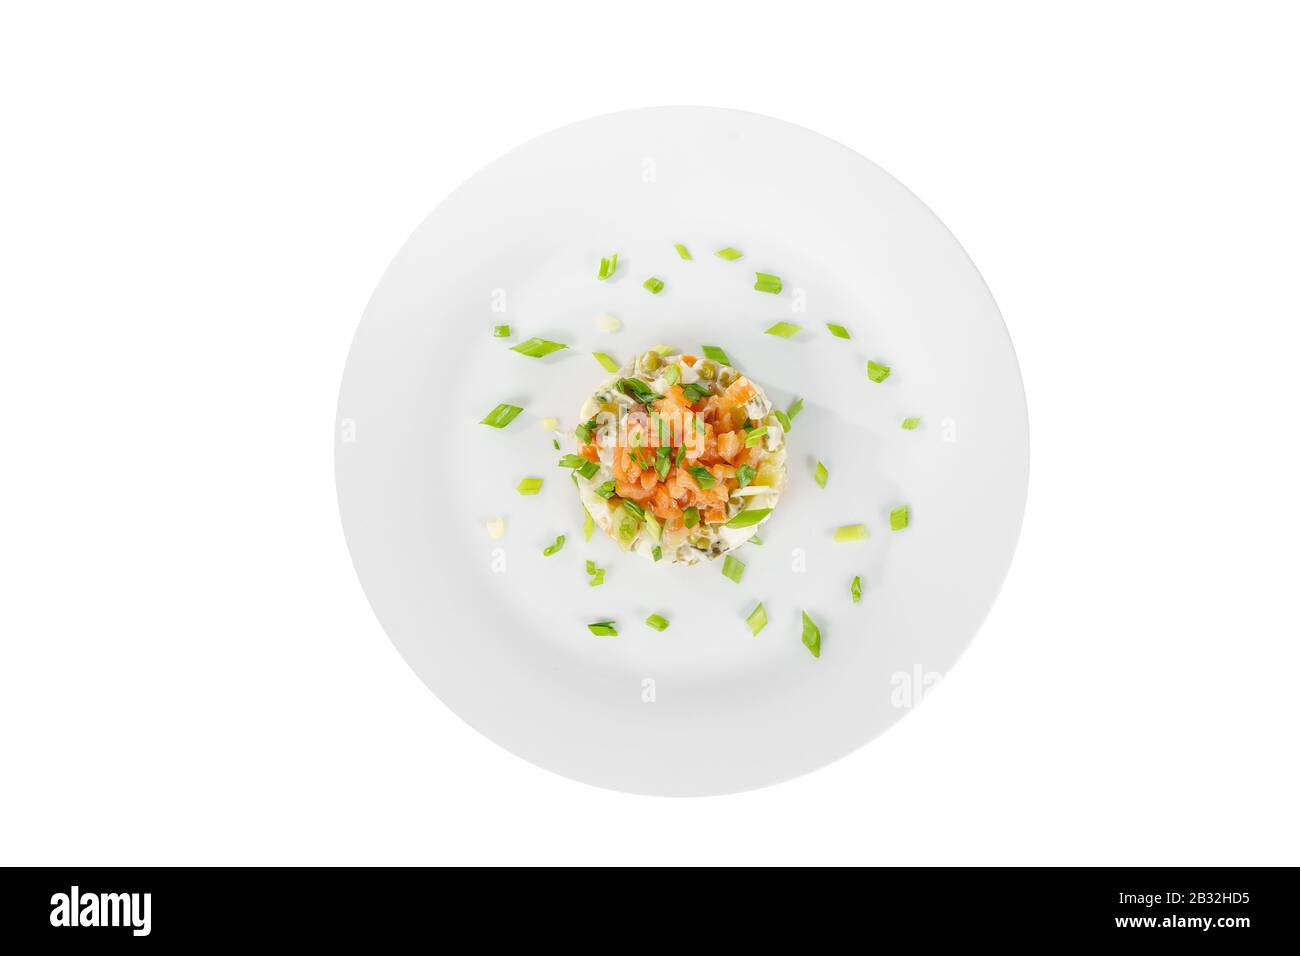 Russian salad with peas, red fish, chum salmon, eggs, cucumbers, carrots, potatoes, decorate green onion on plate, view from above, white isolated bac Stock Photo